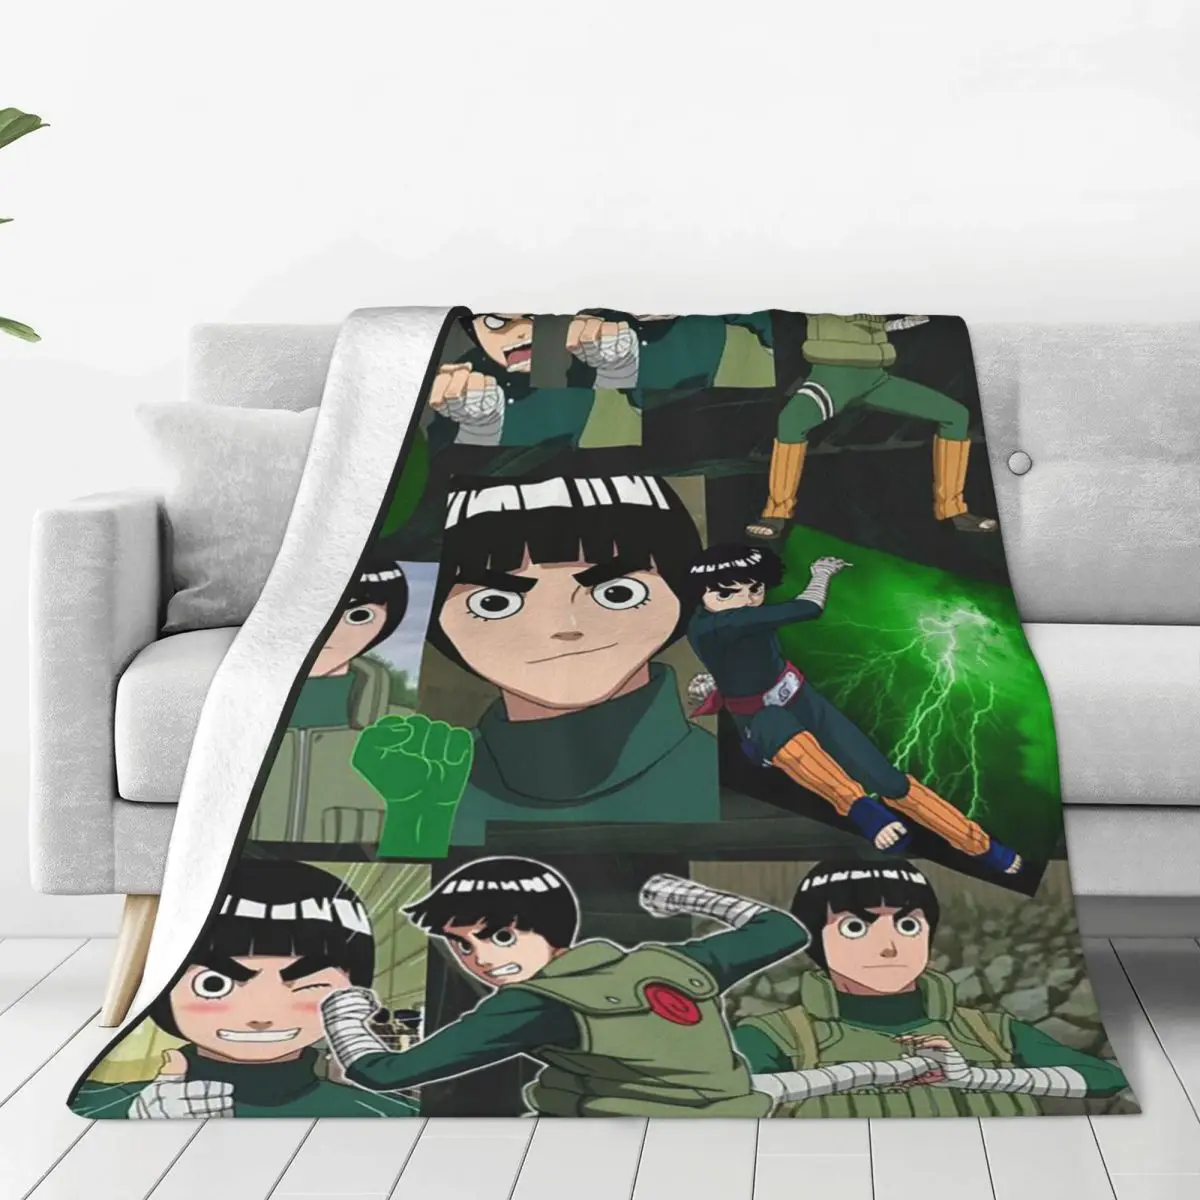 

Rock Lee Funny Cartoon Animated Character Blankets Flannel Spring Autumn Super Soft Throw Blanket for Bed Outdoor Quilt